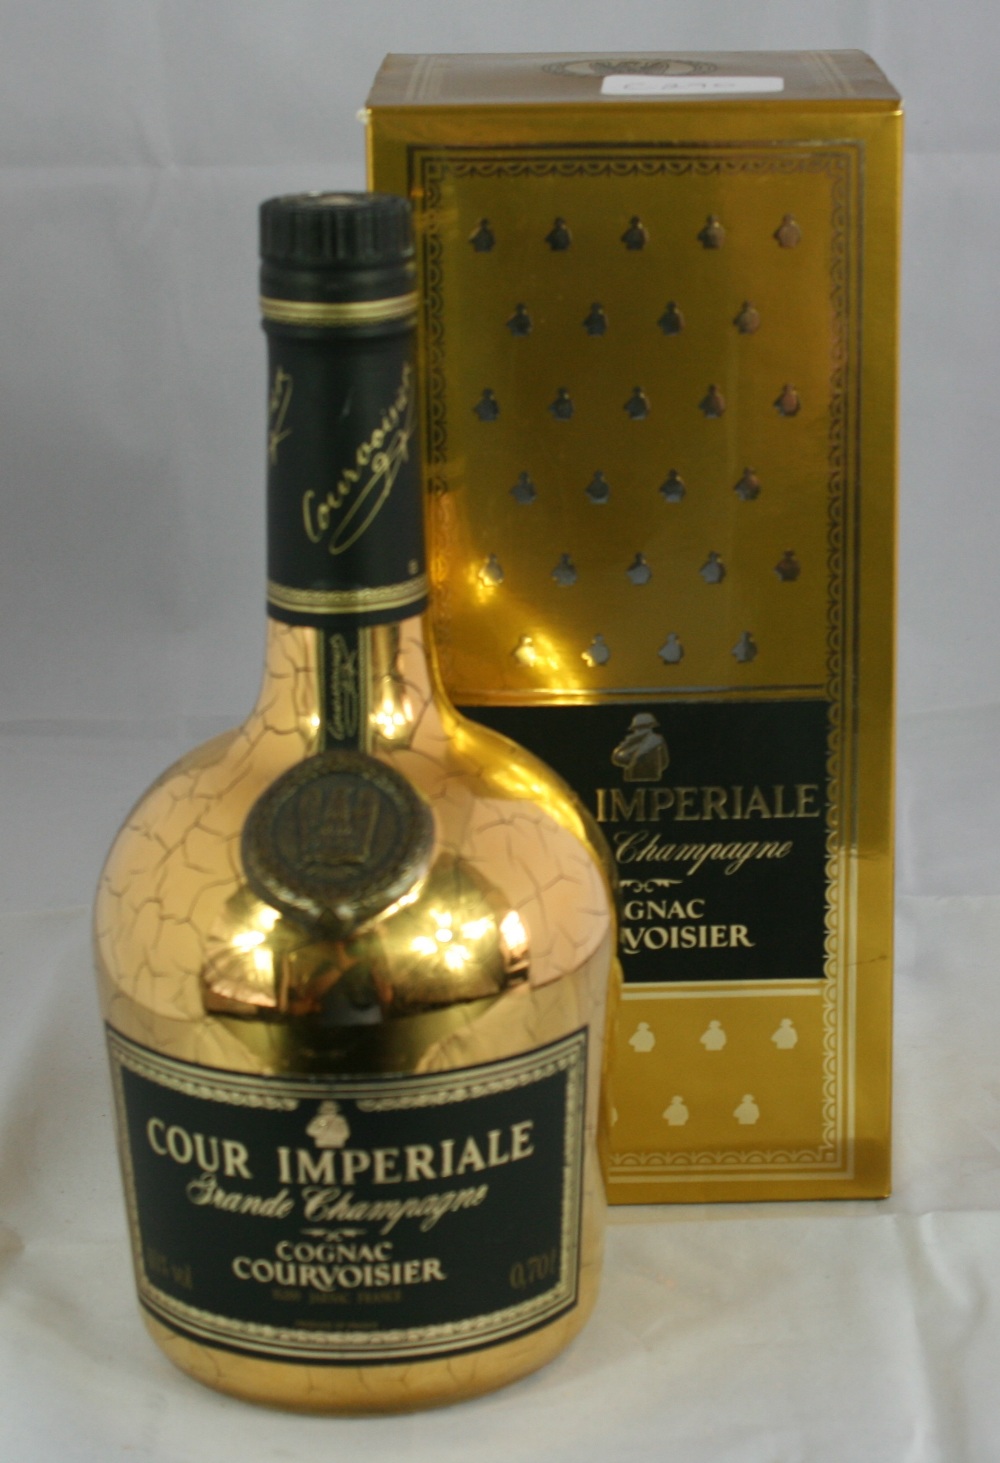 COURVOISIER - bottle of Cour Imperiale Grande Champagne Cognac from Jarnac,  gold crackle effect b